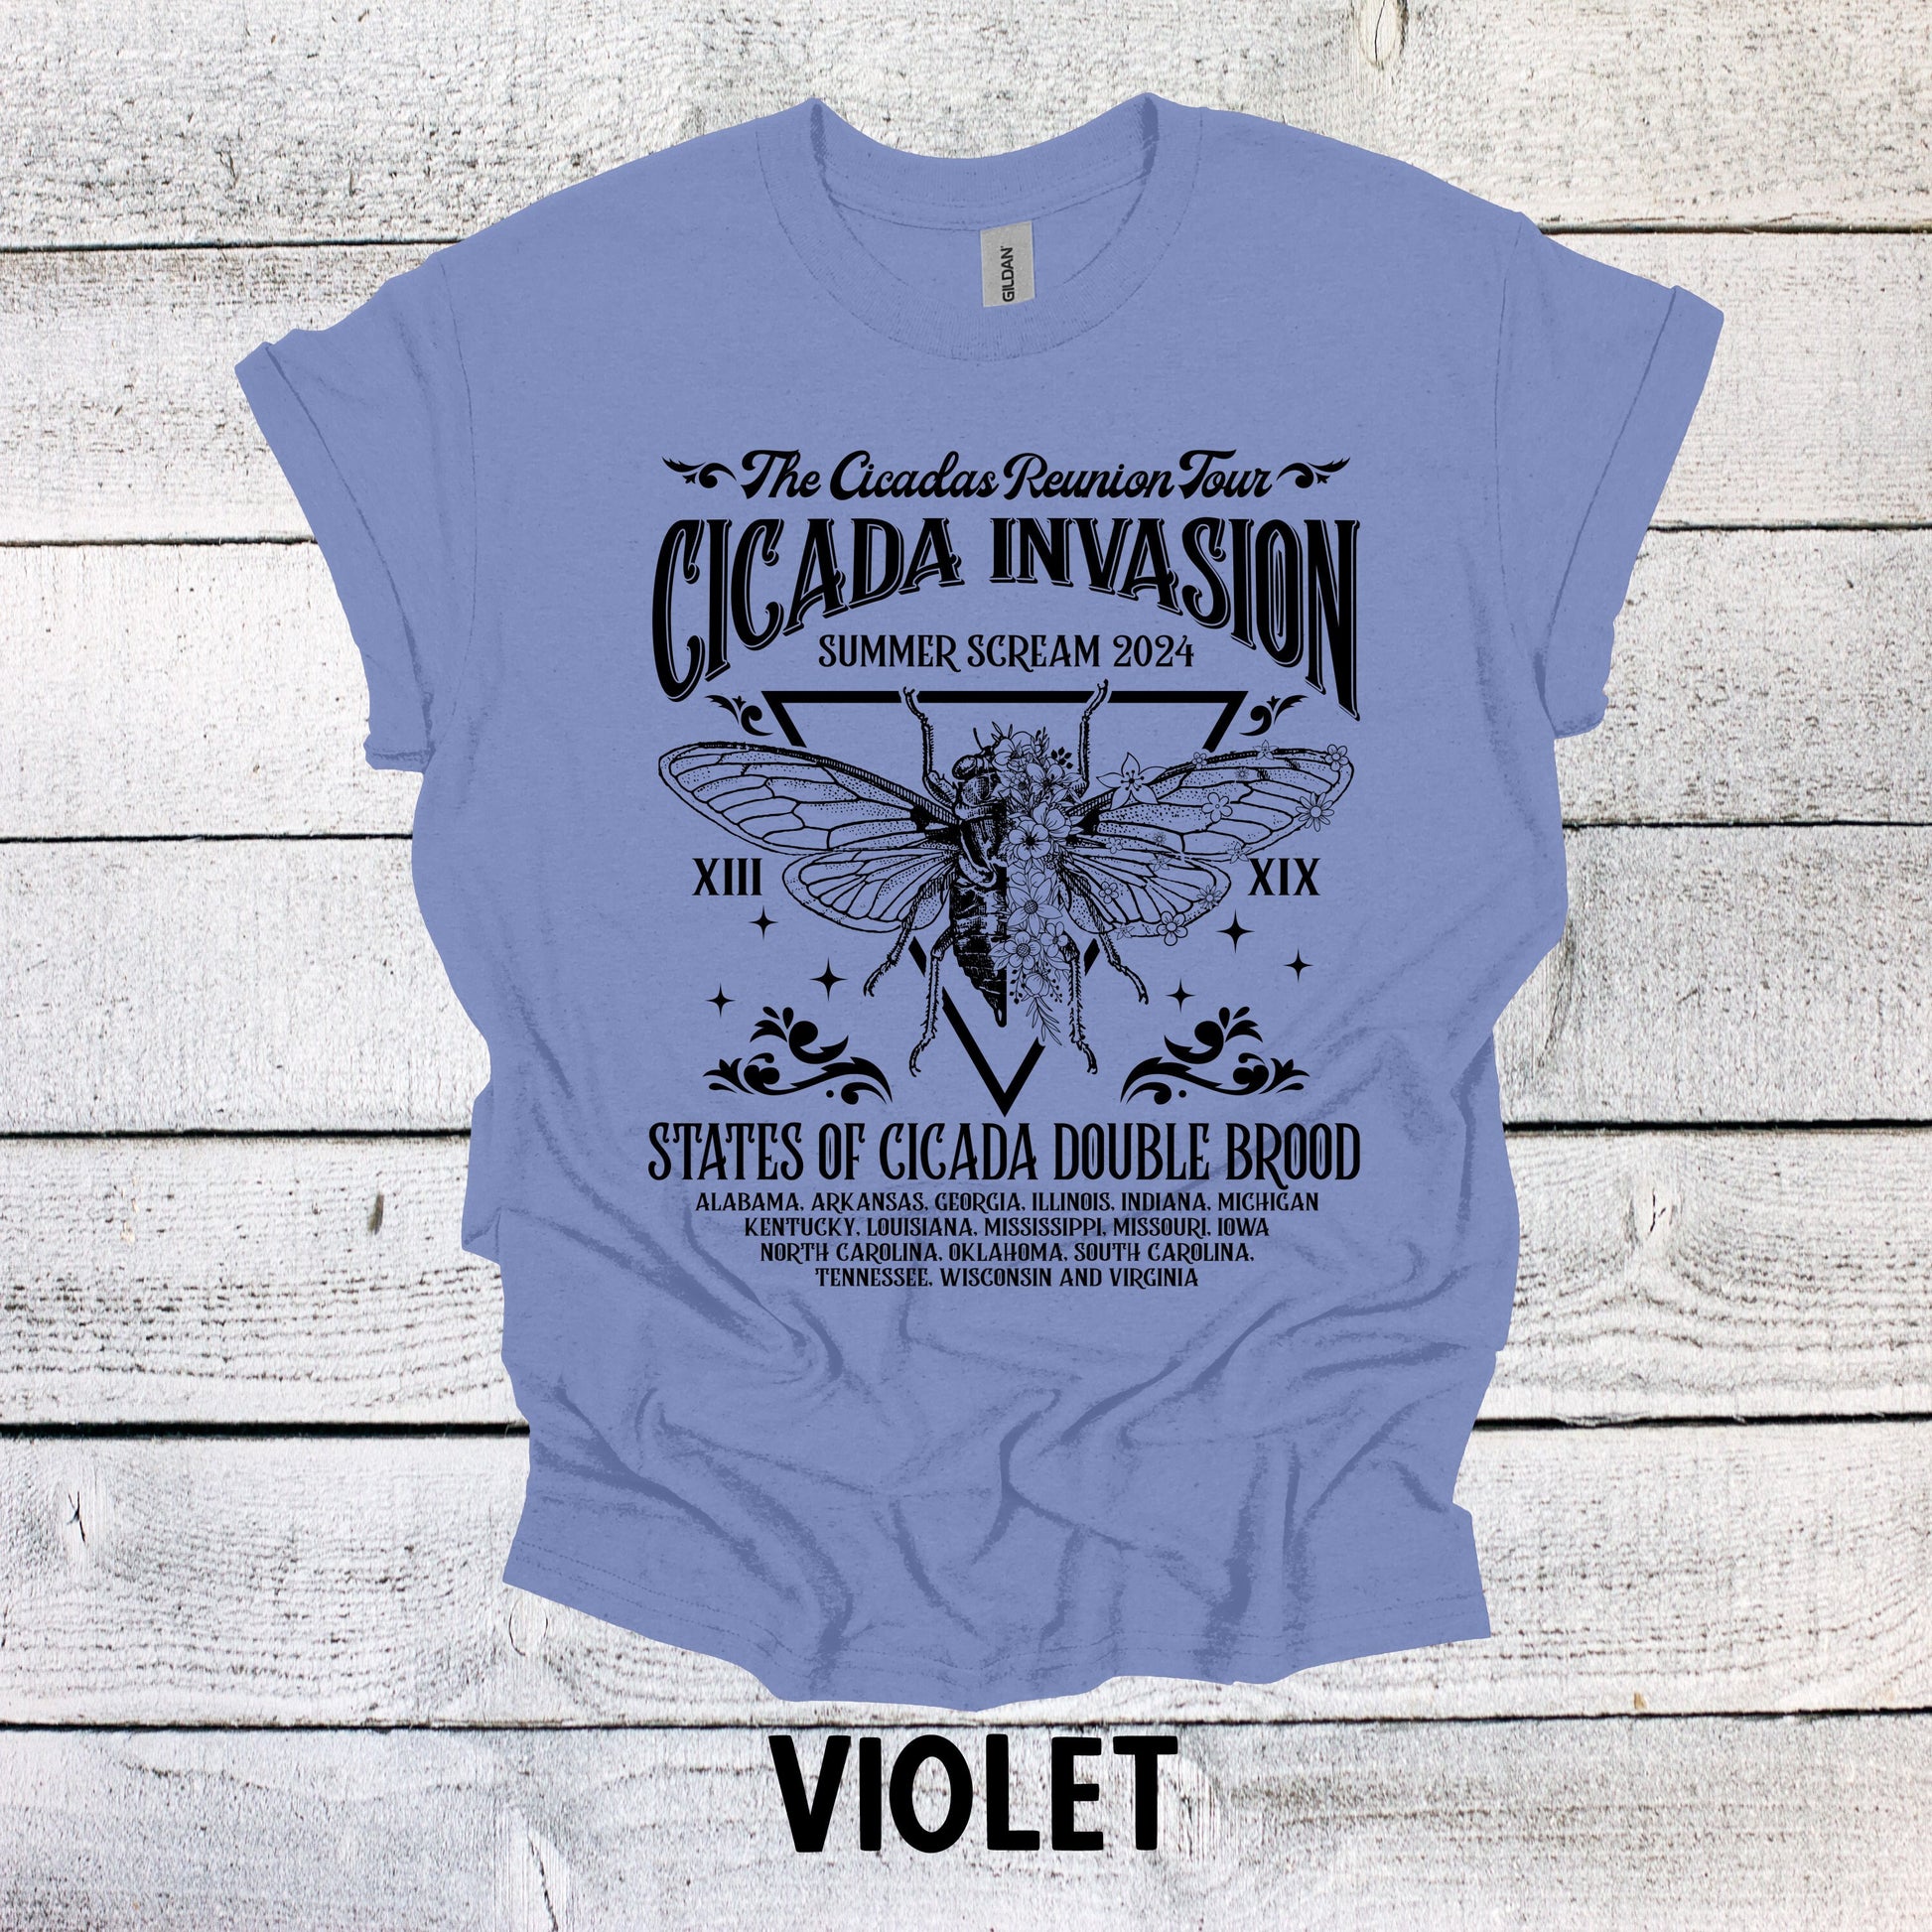 Unique Cicada Invasion Tour Shirt - Nature Inspired T-Shirt - Cool Summer Tee for Nature Lovers